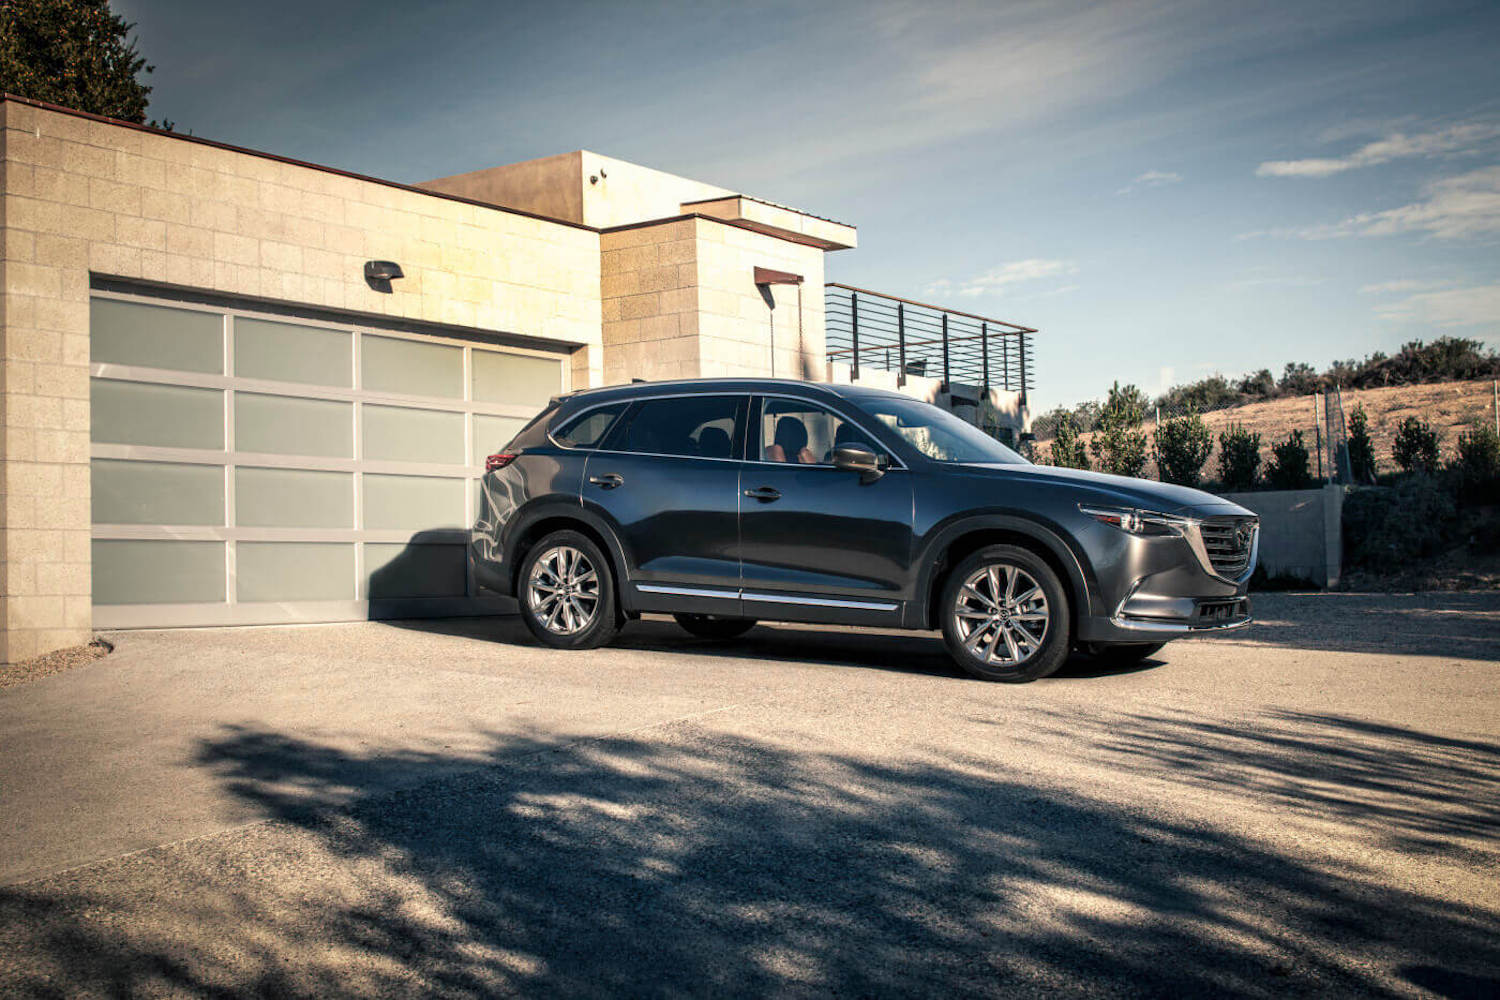 A dark grey 2018 Mazda CX-9 parked in a driveway, the 2018 Mazda CX-9 is one of the best CPO three-row SUVs under $30,000